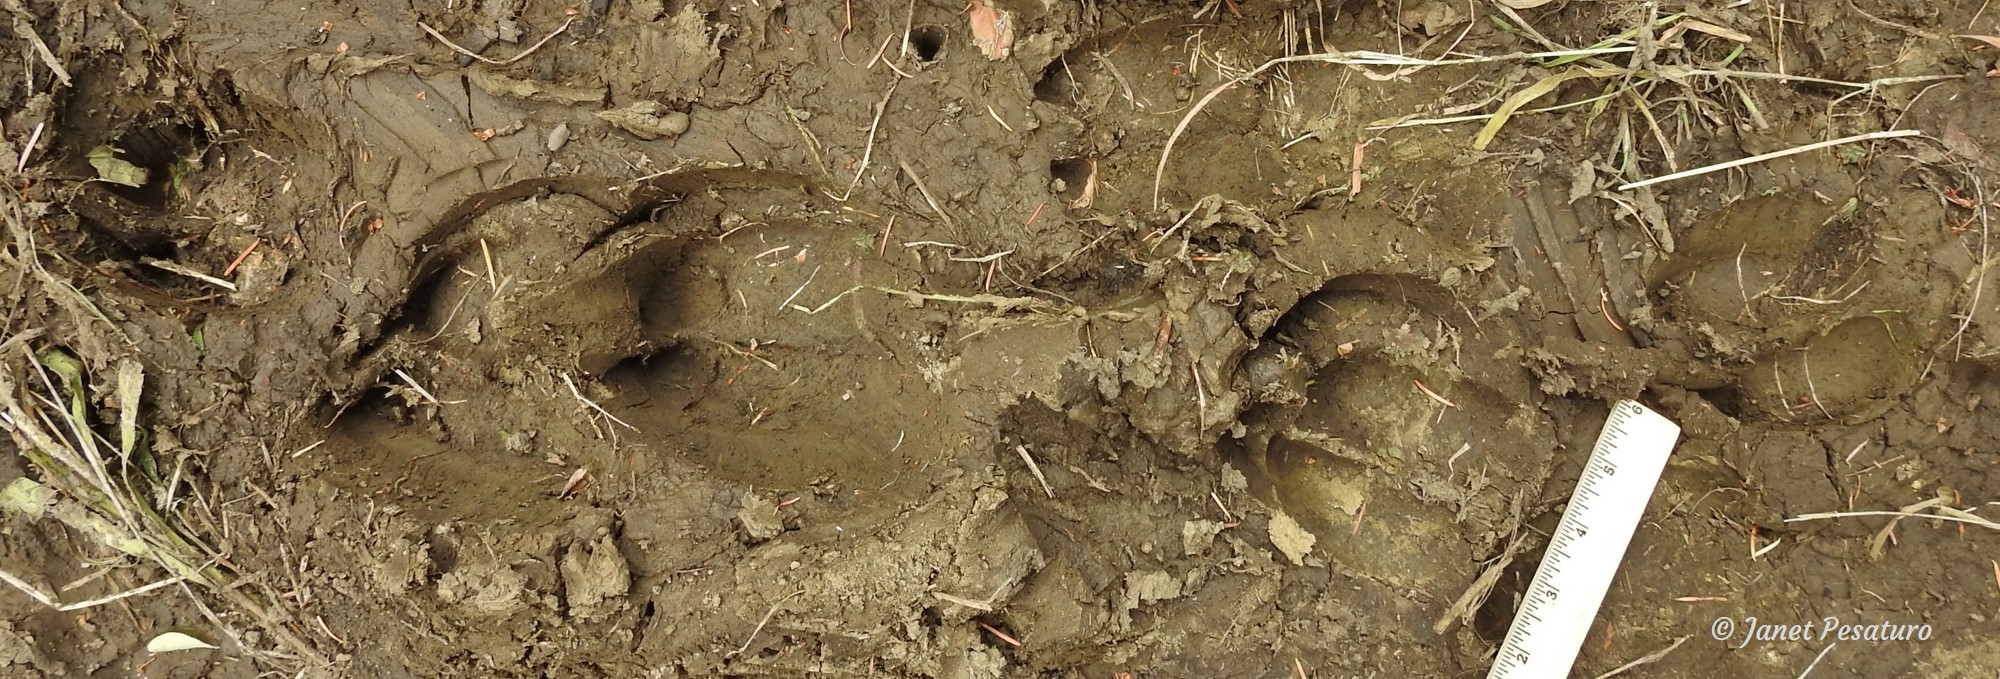 Elk tracks and sign: Foot prints on a run used by multiple animals.